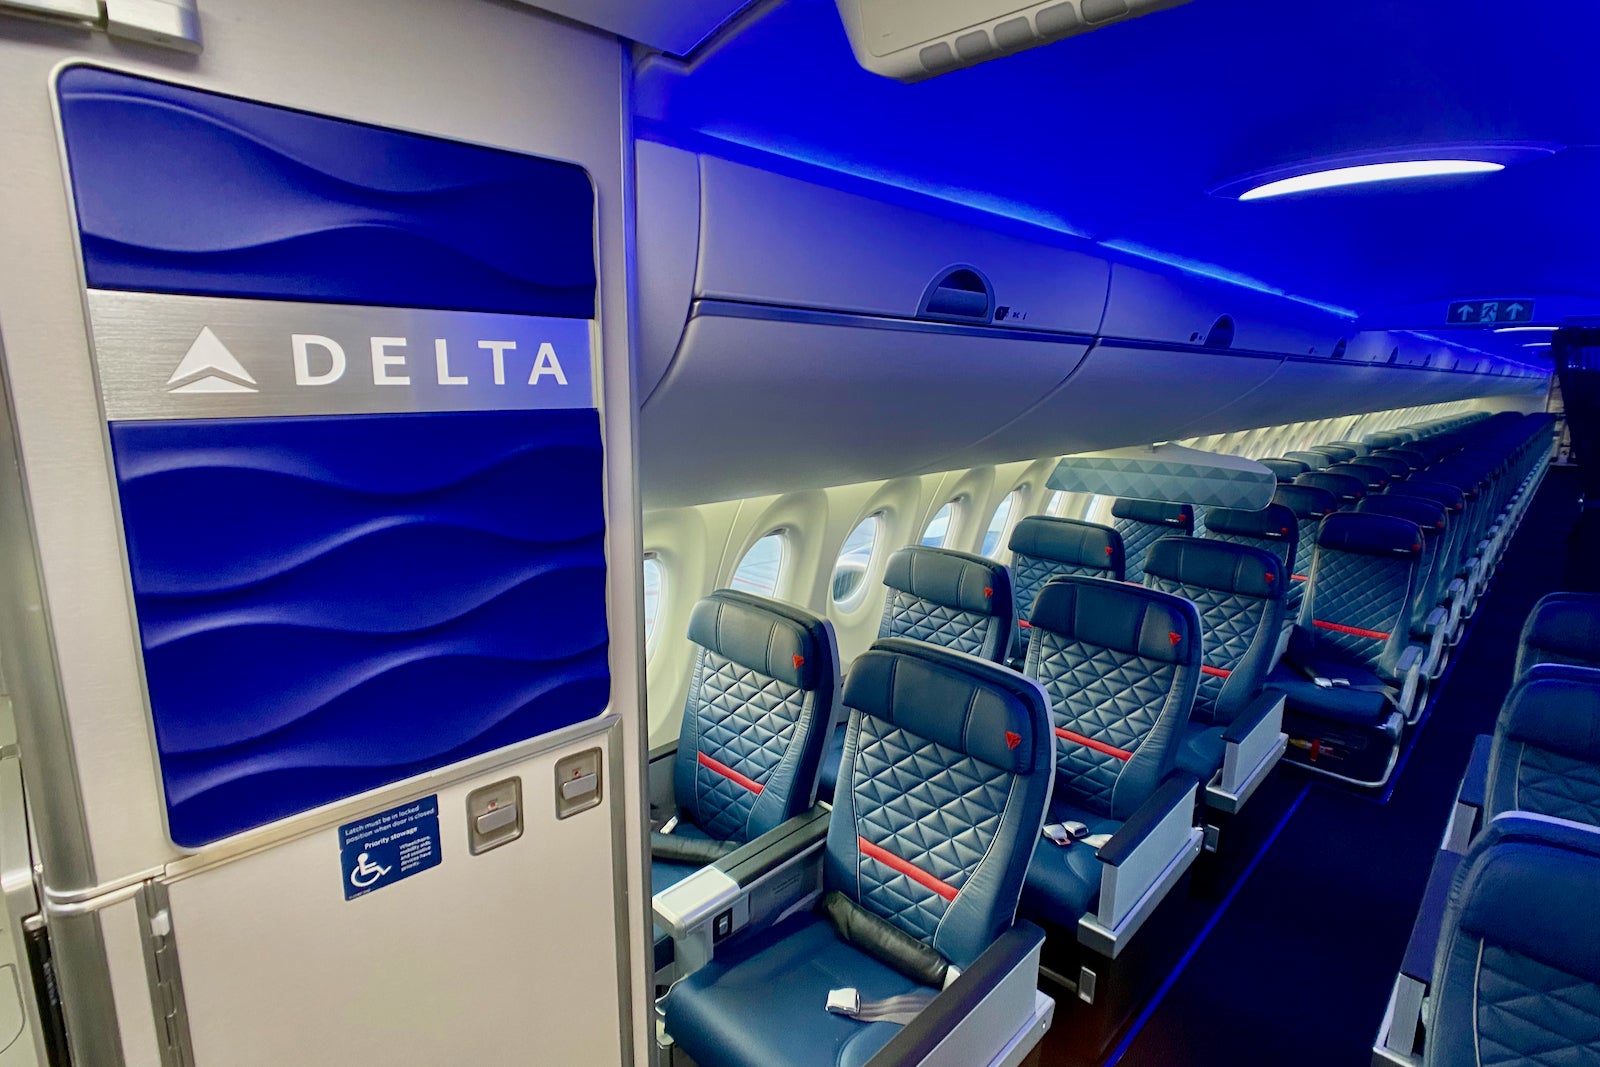 a Delta sign next to empty economy seats on a plane